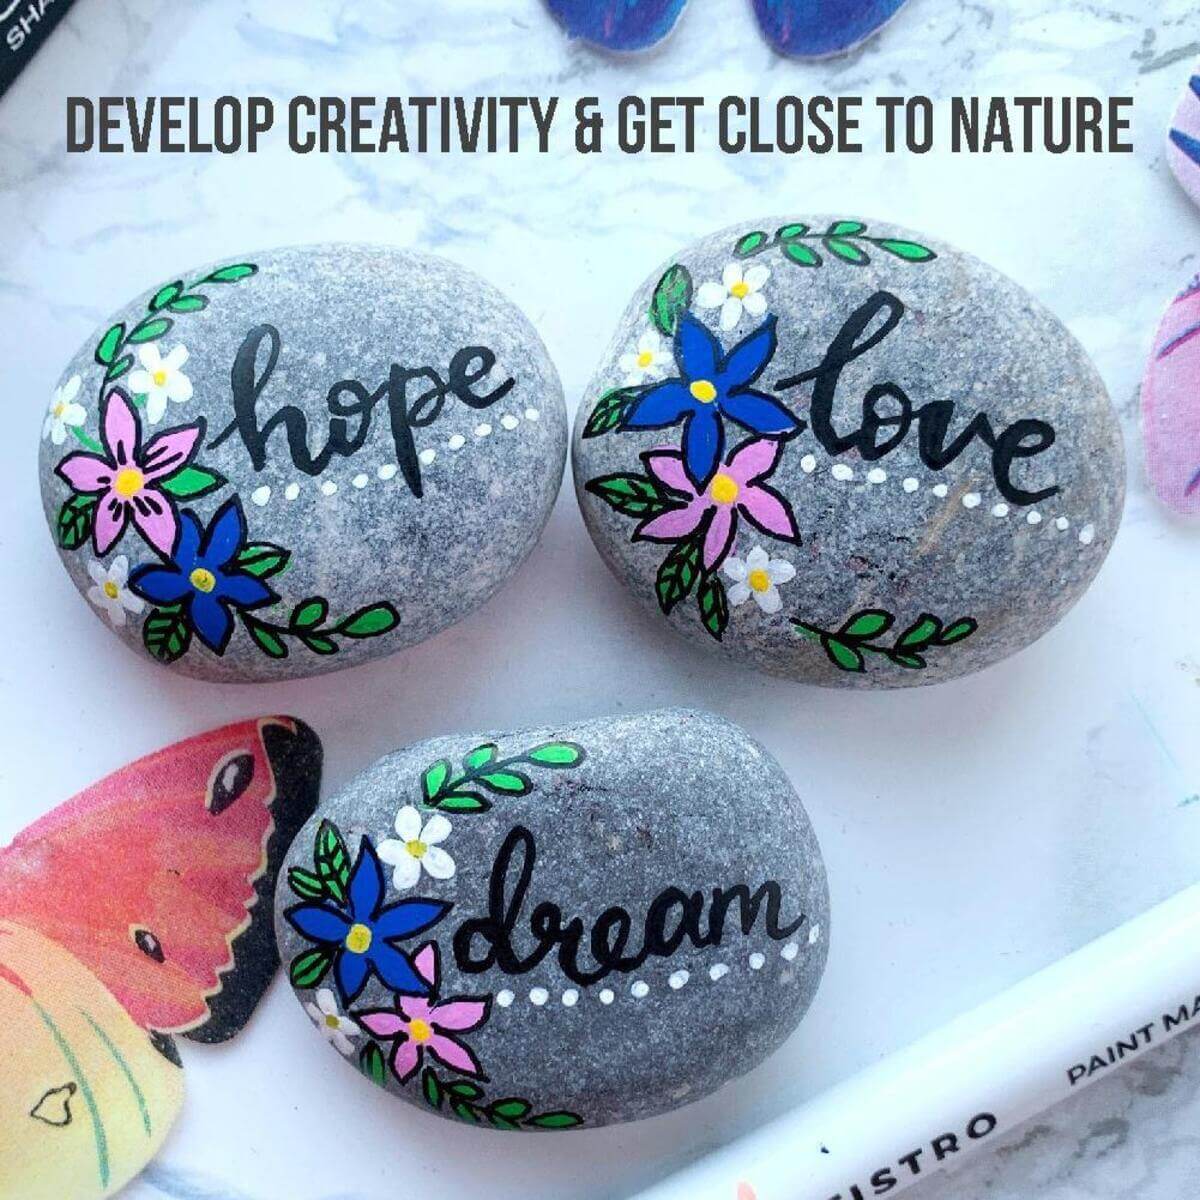 develop creativity & get close to nature with artistro rocks